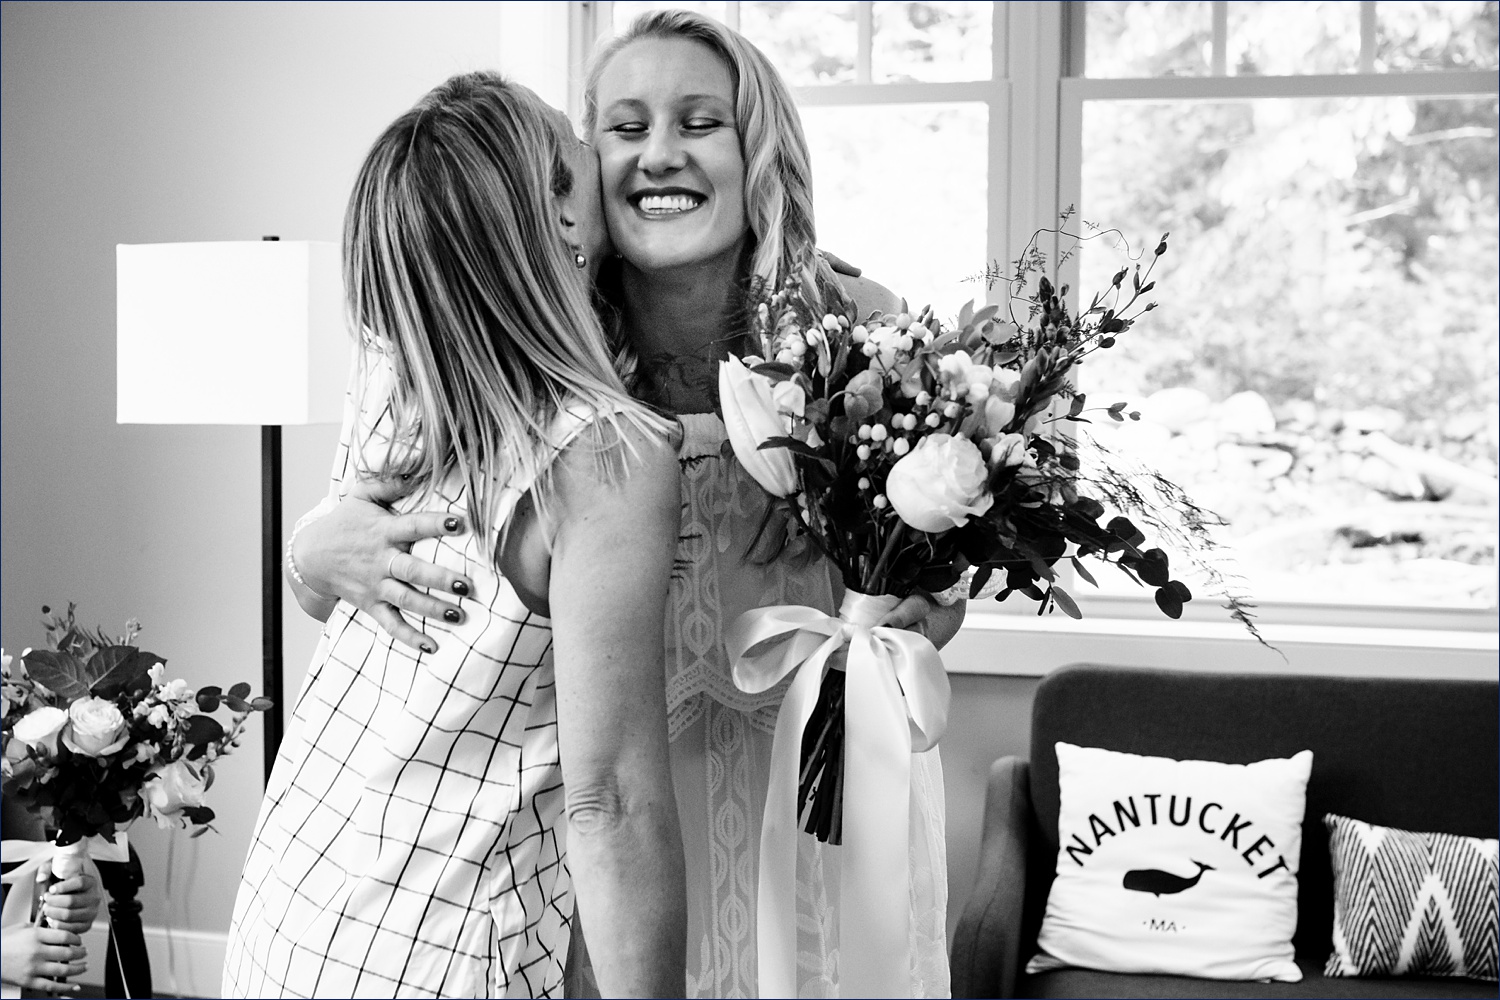 A hug from a friend on the wedding day for the bride